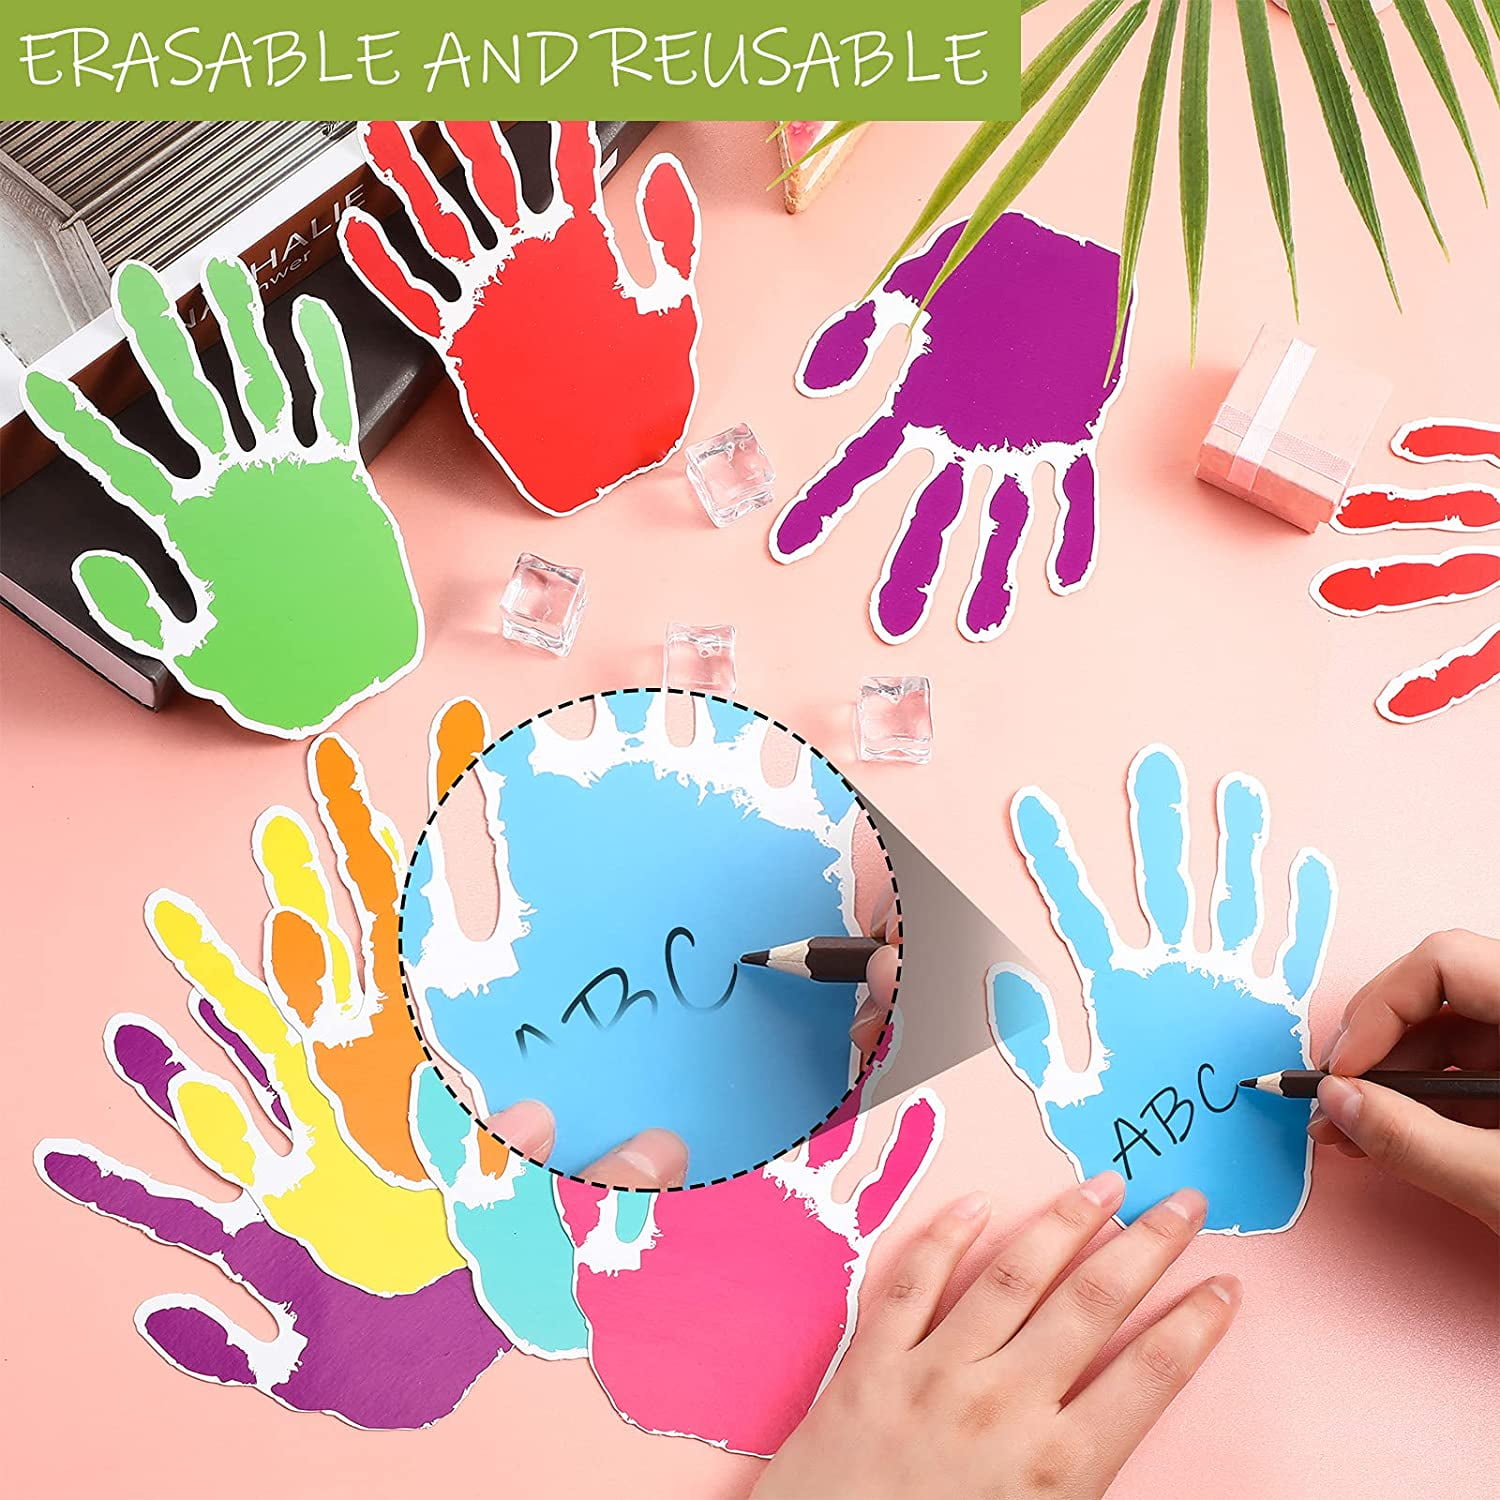 Hand Creative Cutouts Handprint Accents Paper Cutouts Name Tags Bulletin Board Classroom Decoration for Teacher Student Back to School Party 48 Pieces Colorful Handprint Cut-Outs 5.5 x 3.9 Inch